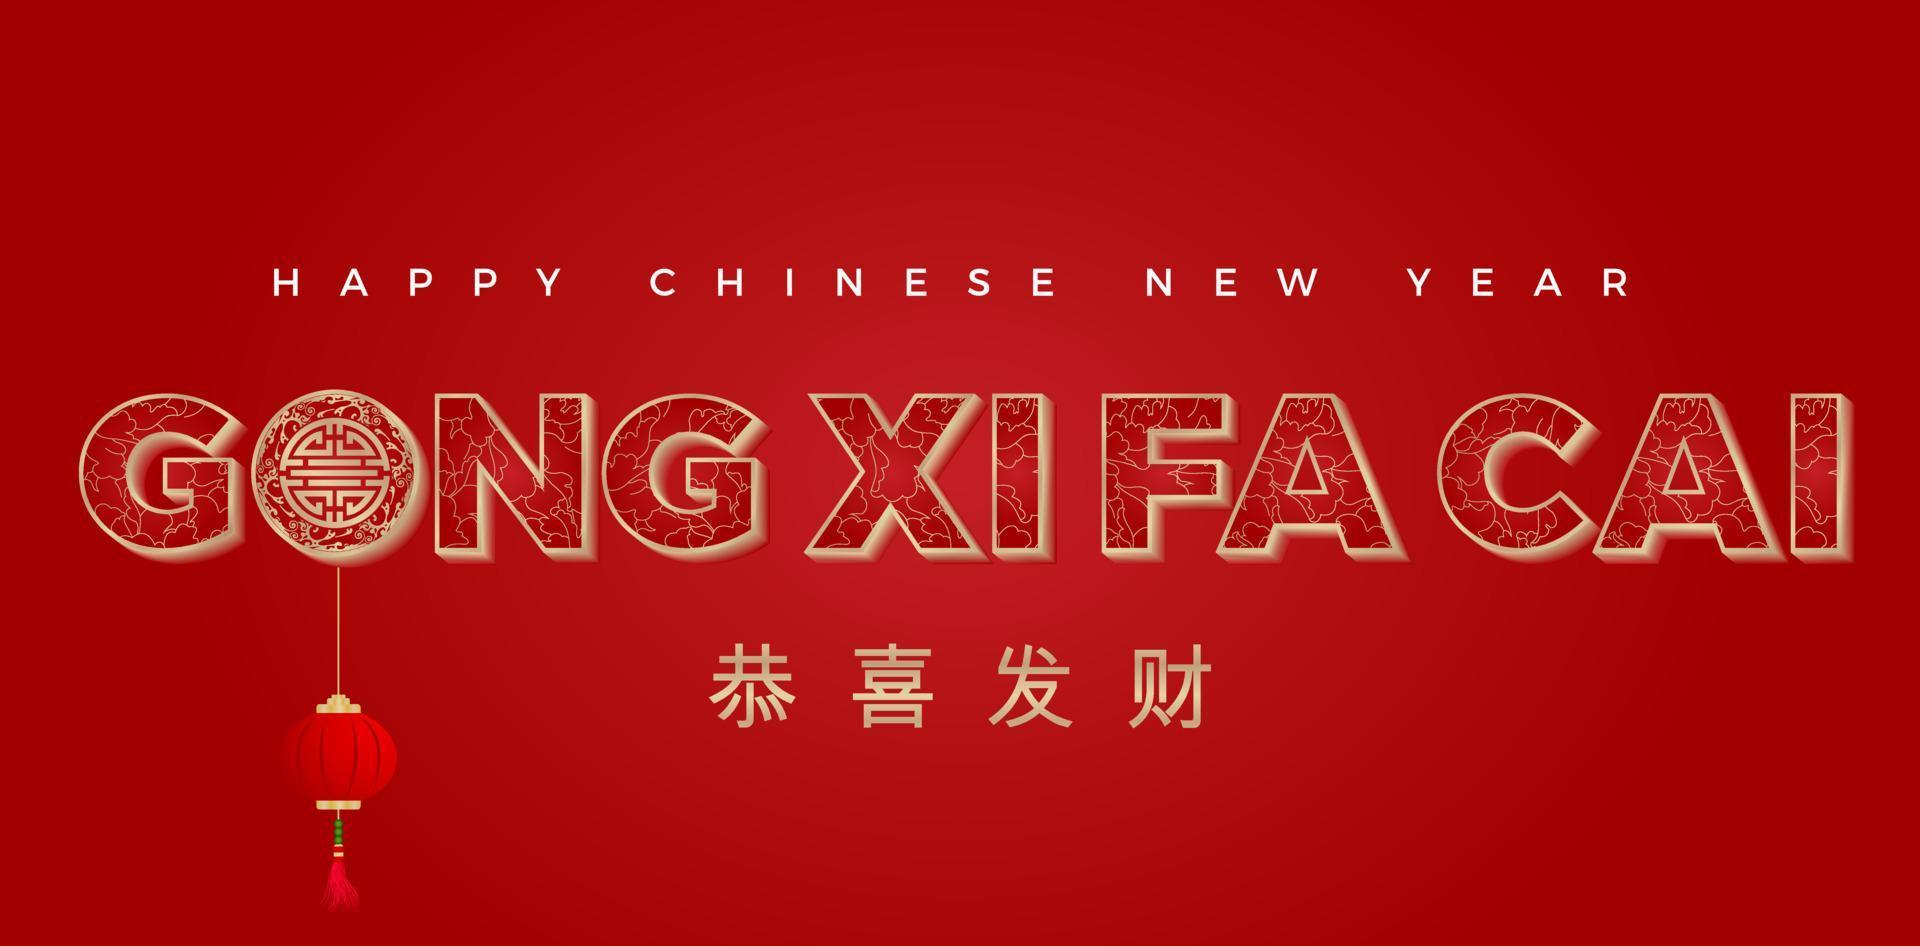 Gong Xi Fa Cai fonts with lines peony flower inside. Happy Chinese New Year with red backgrounds, applicable for banner, greeting cards, flyer, poster, social media and store. vector